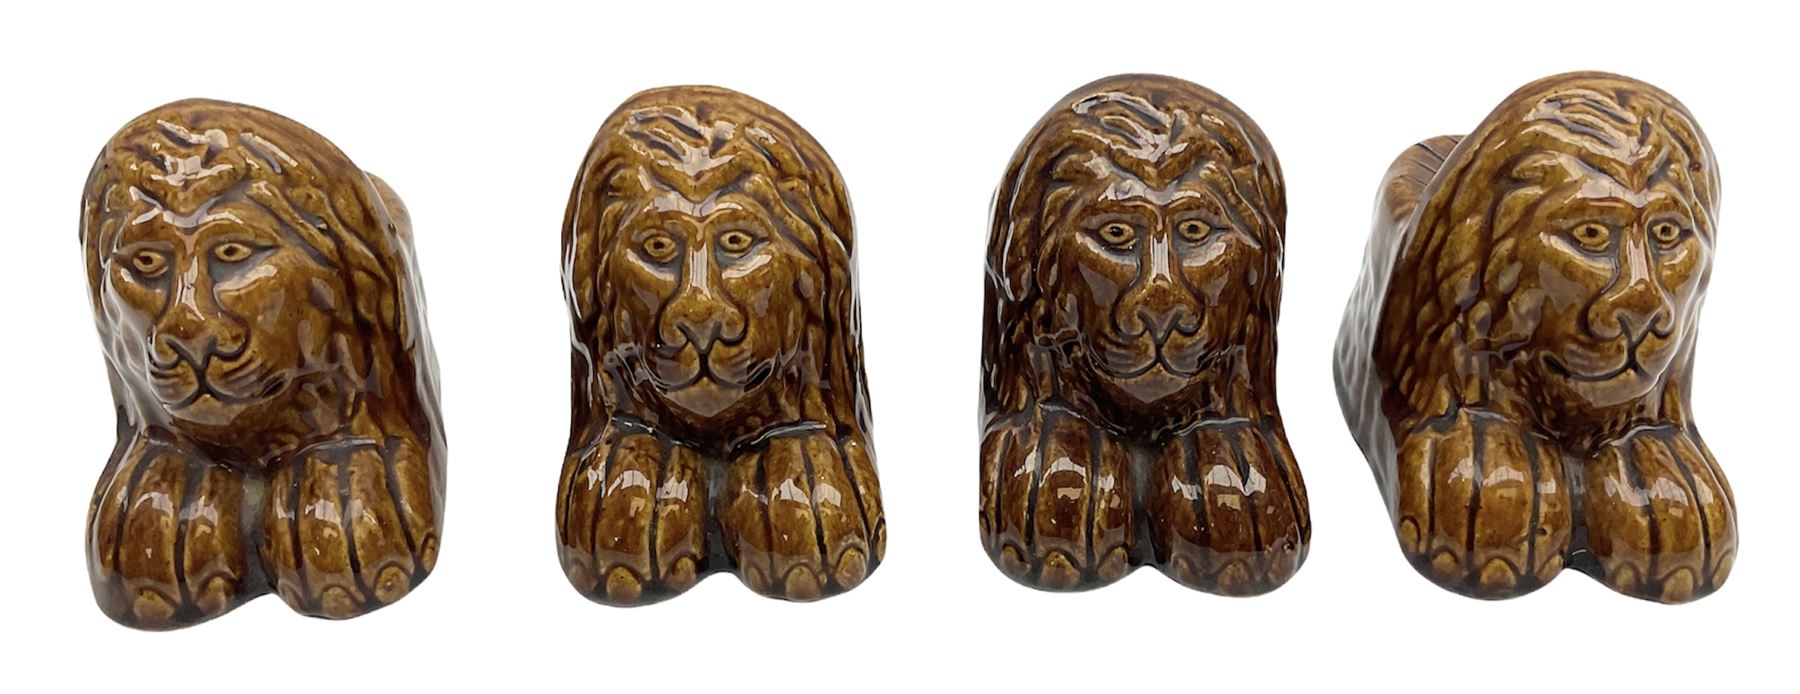 Set of four 19th century treacle glaze furniture/sash window rests modelled as lions - Image 2 of 13